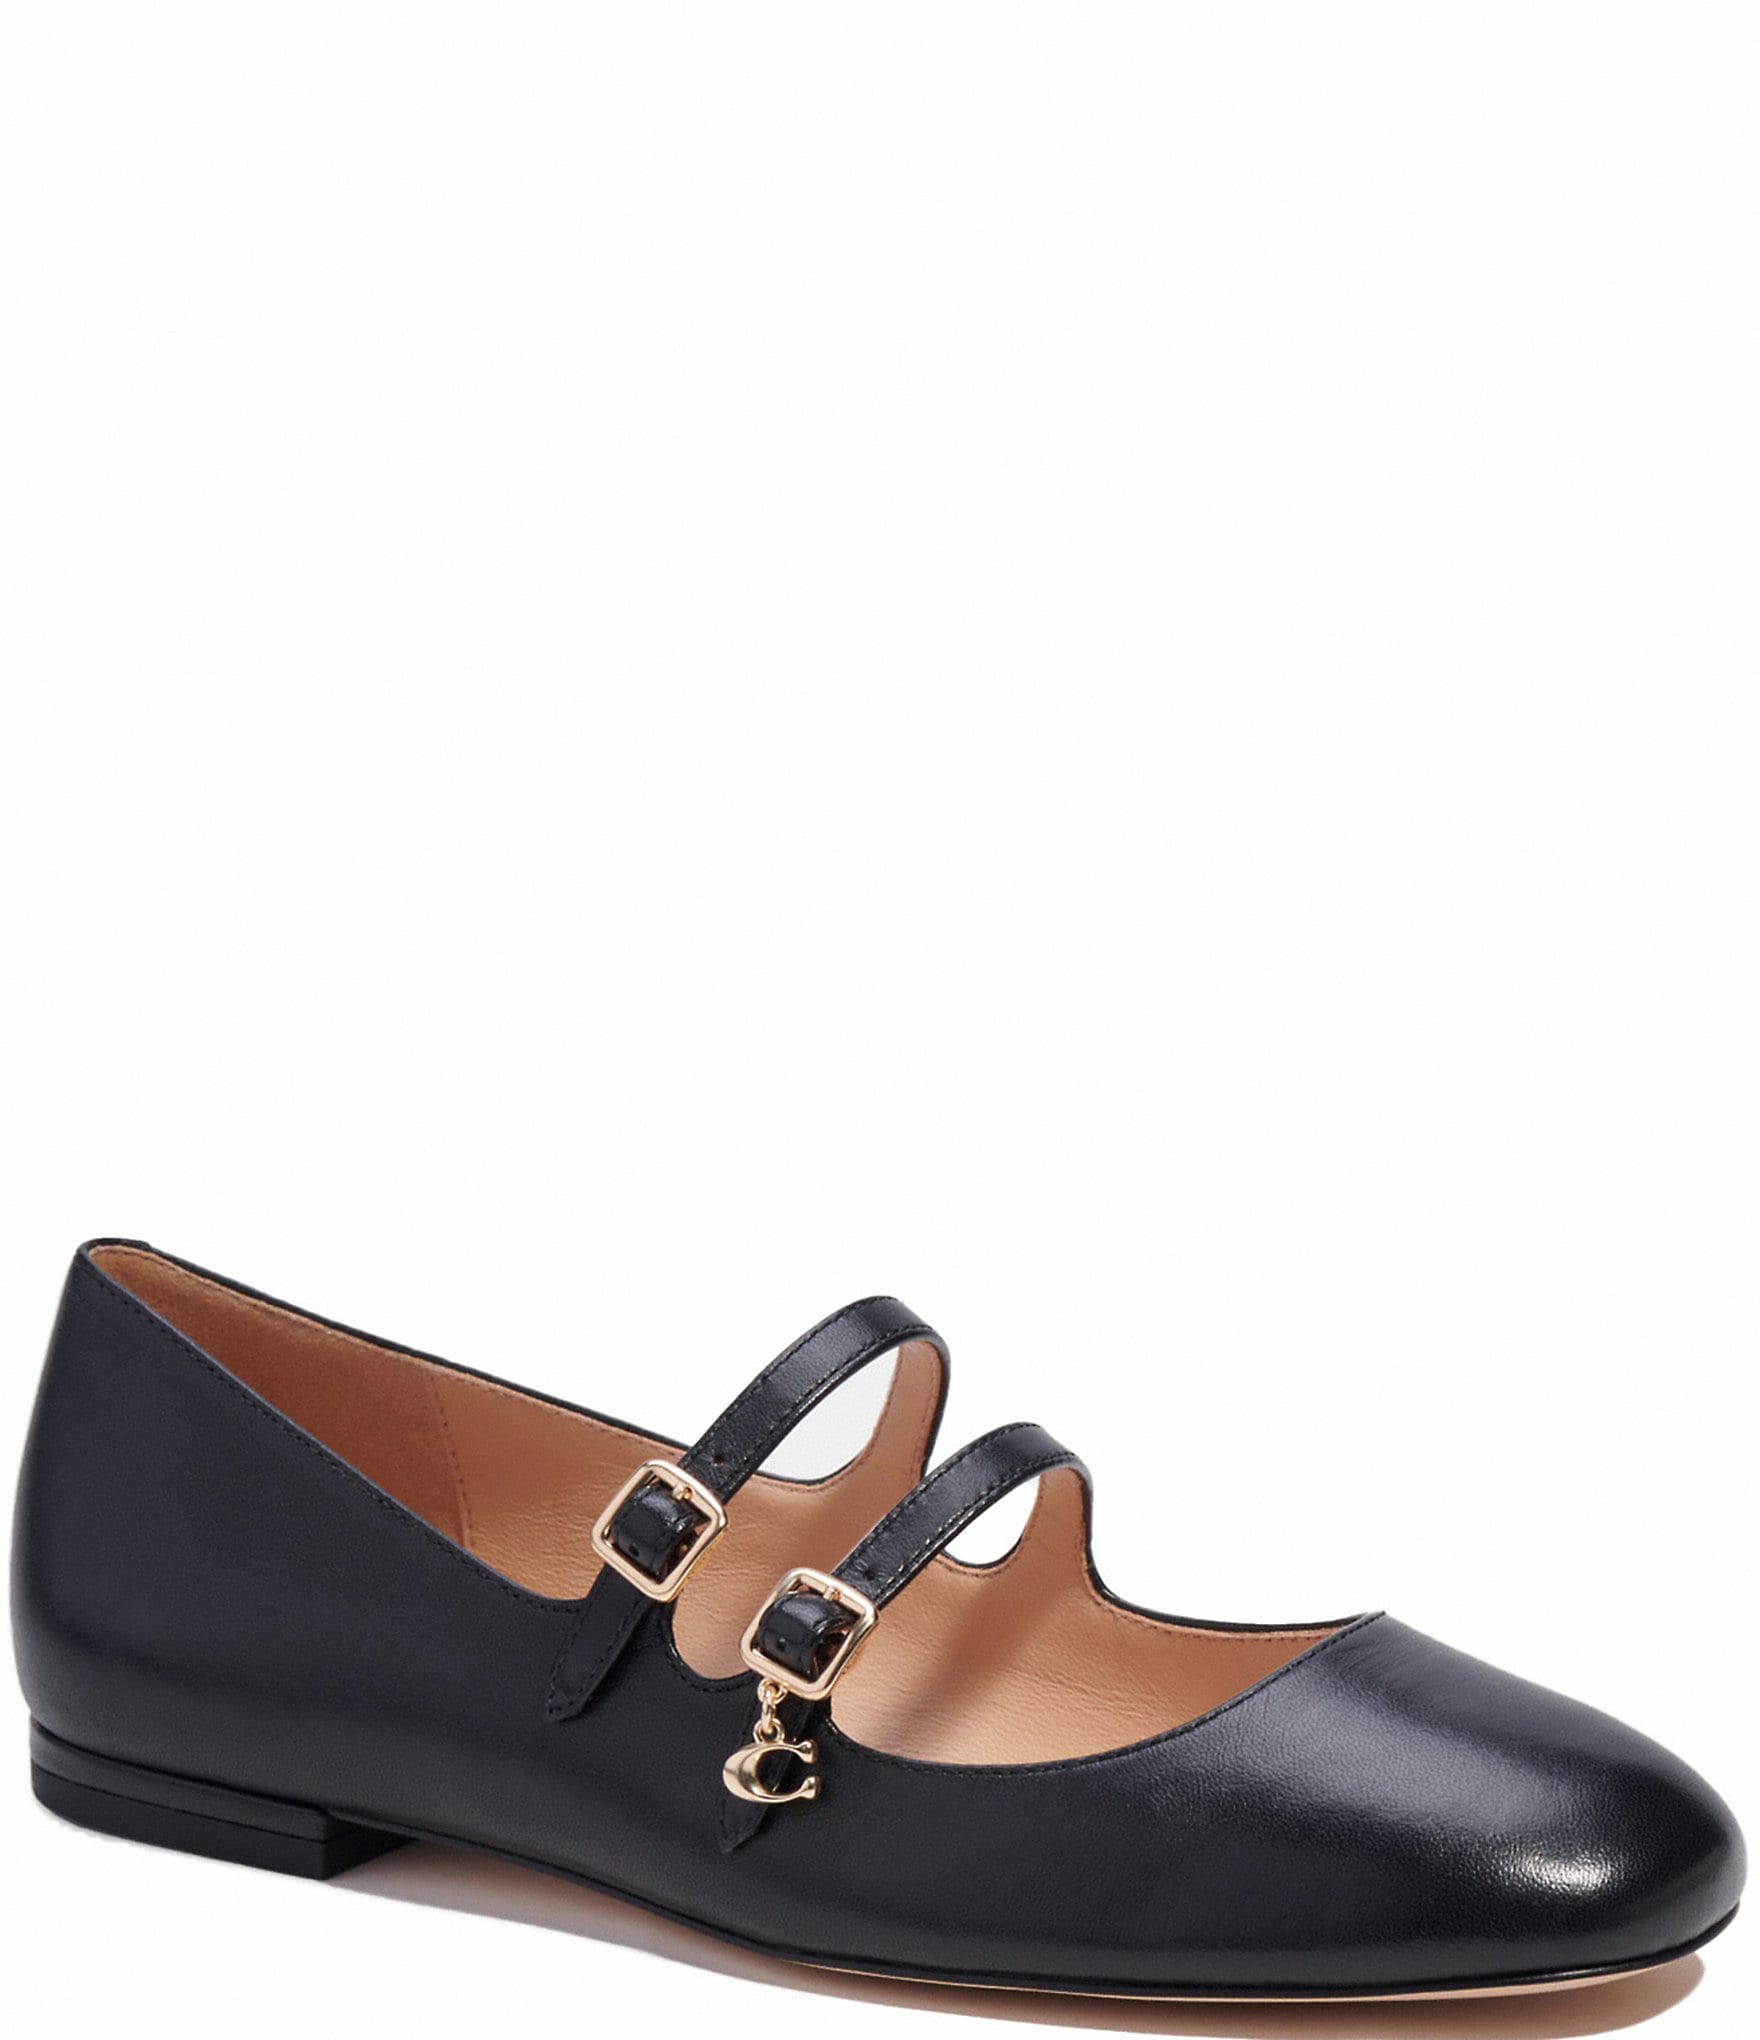 Coach Whitley Mary Jane Ballet Flats - Black Leather - Size 7M